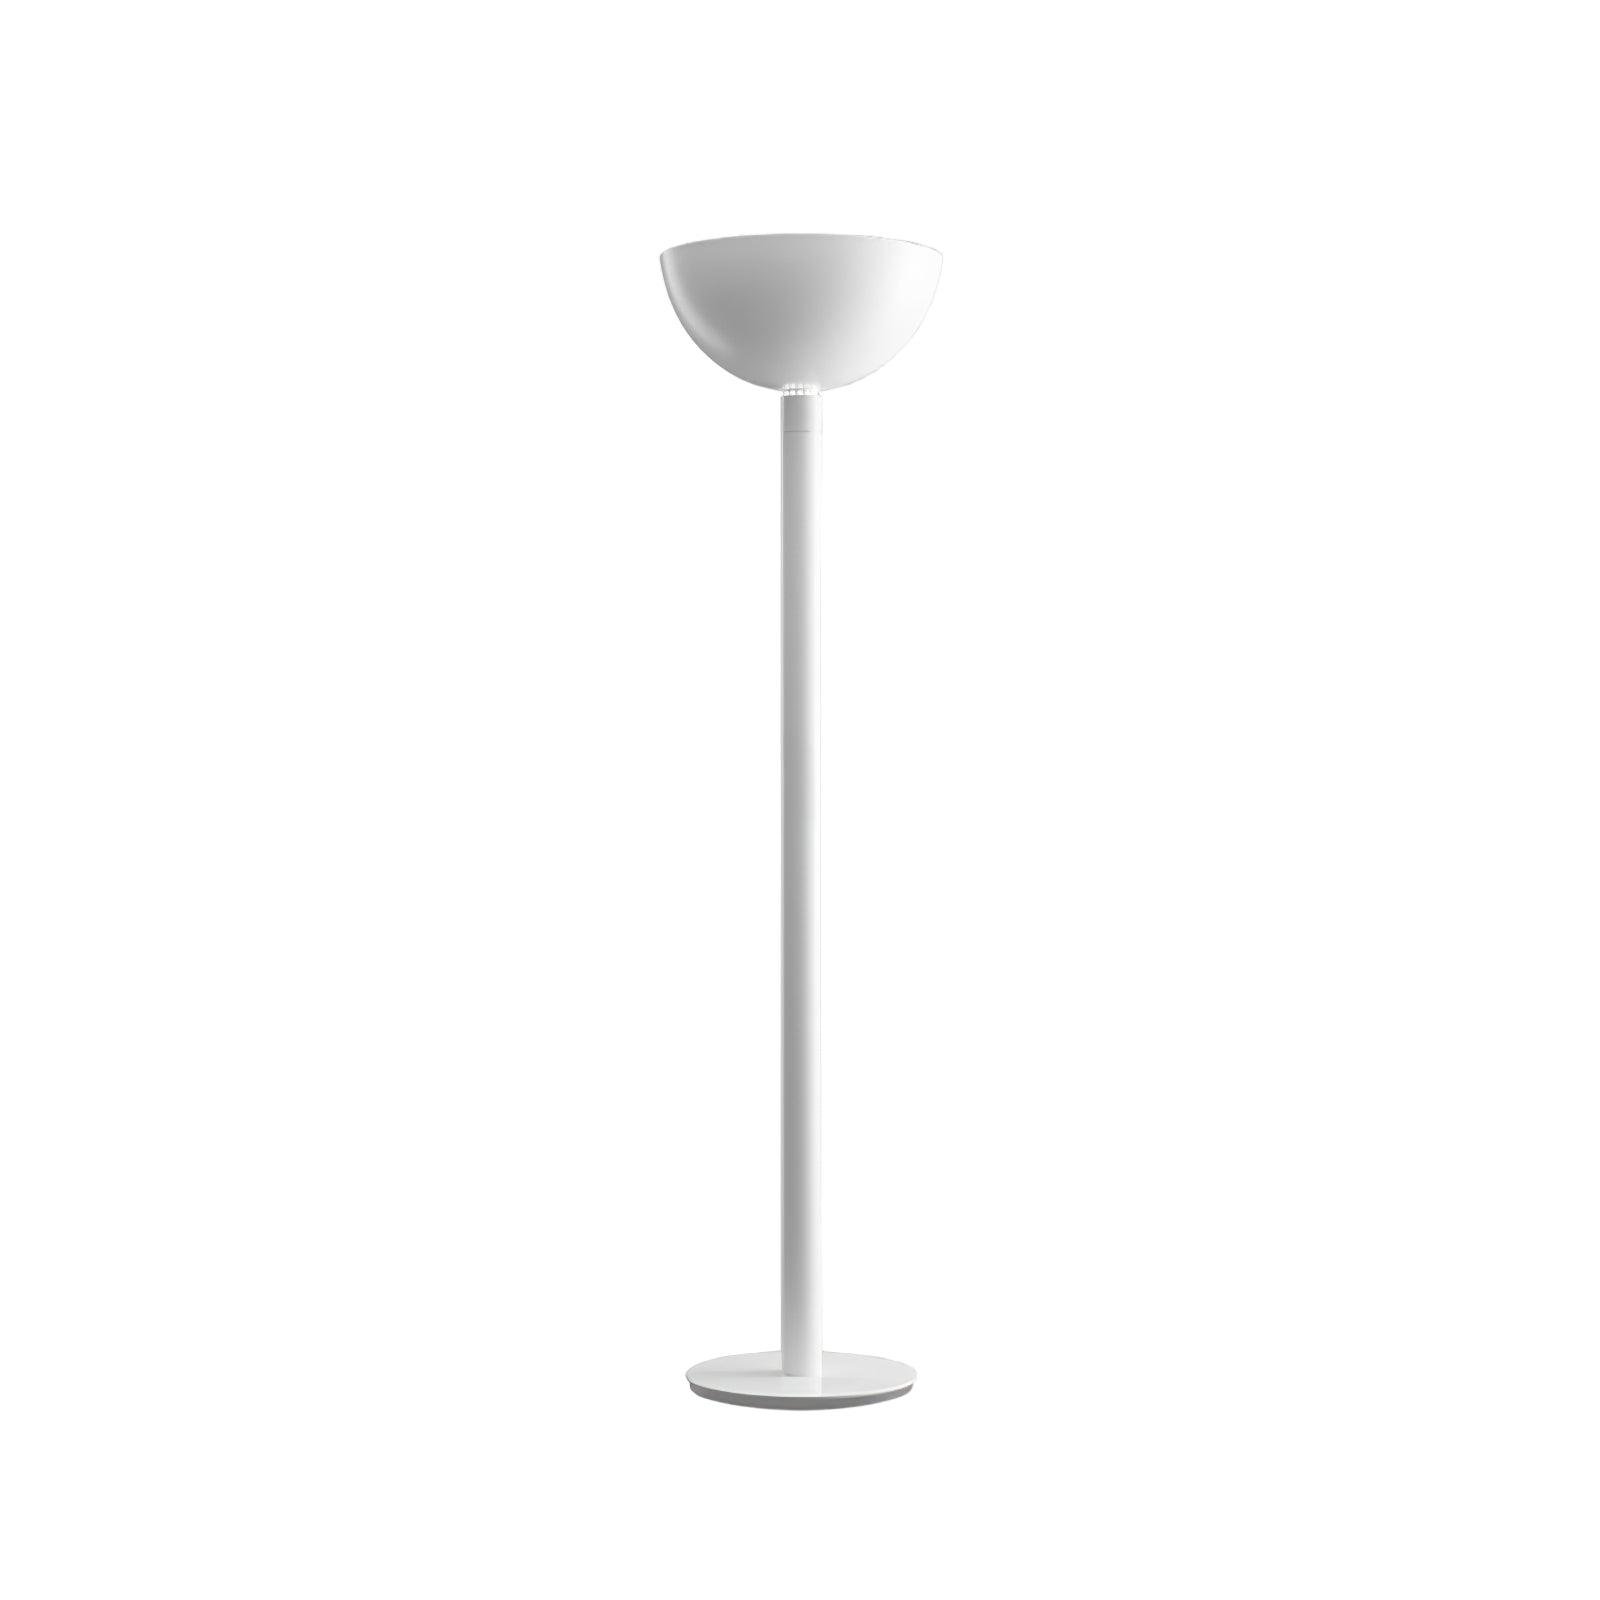 EU Plug White AM2Z Floor Lamp with a 15.7-Inch Diameter and 70.9-Inch Height (40cm x 180cm)